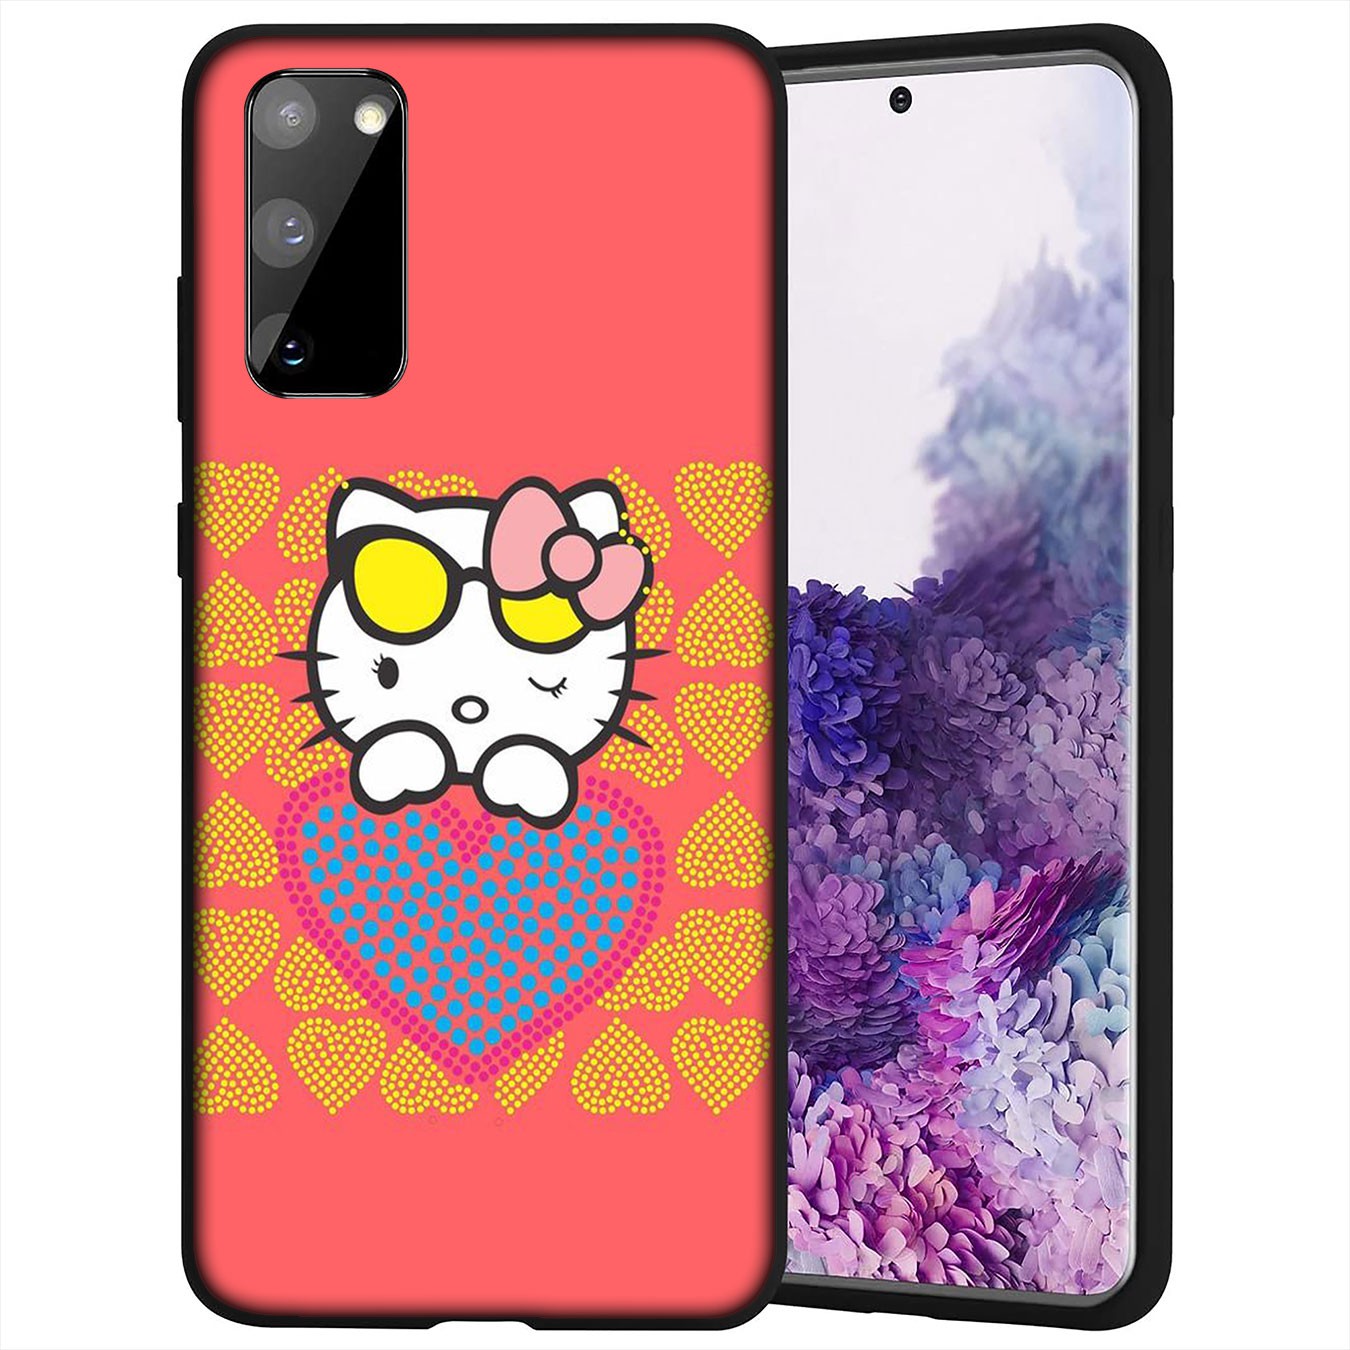 Samsung Galaxy A02S J2 J4 J5 J6 Plus J7 Prime A02 M02 j6+ A42 + Casing Soft Silicone Hello Kitty cute Phone Case